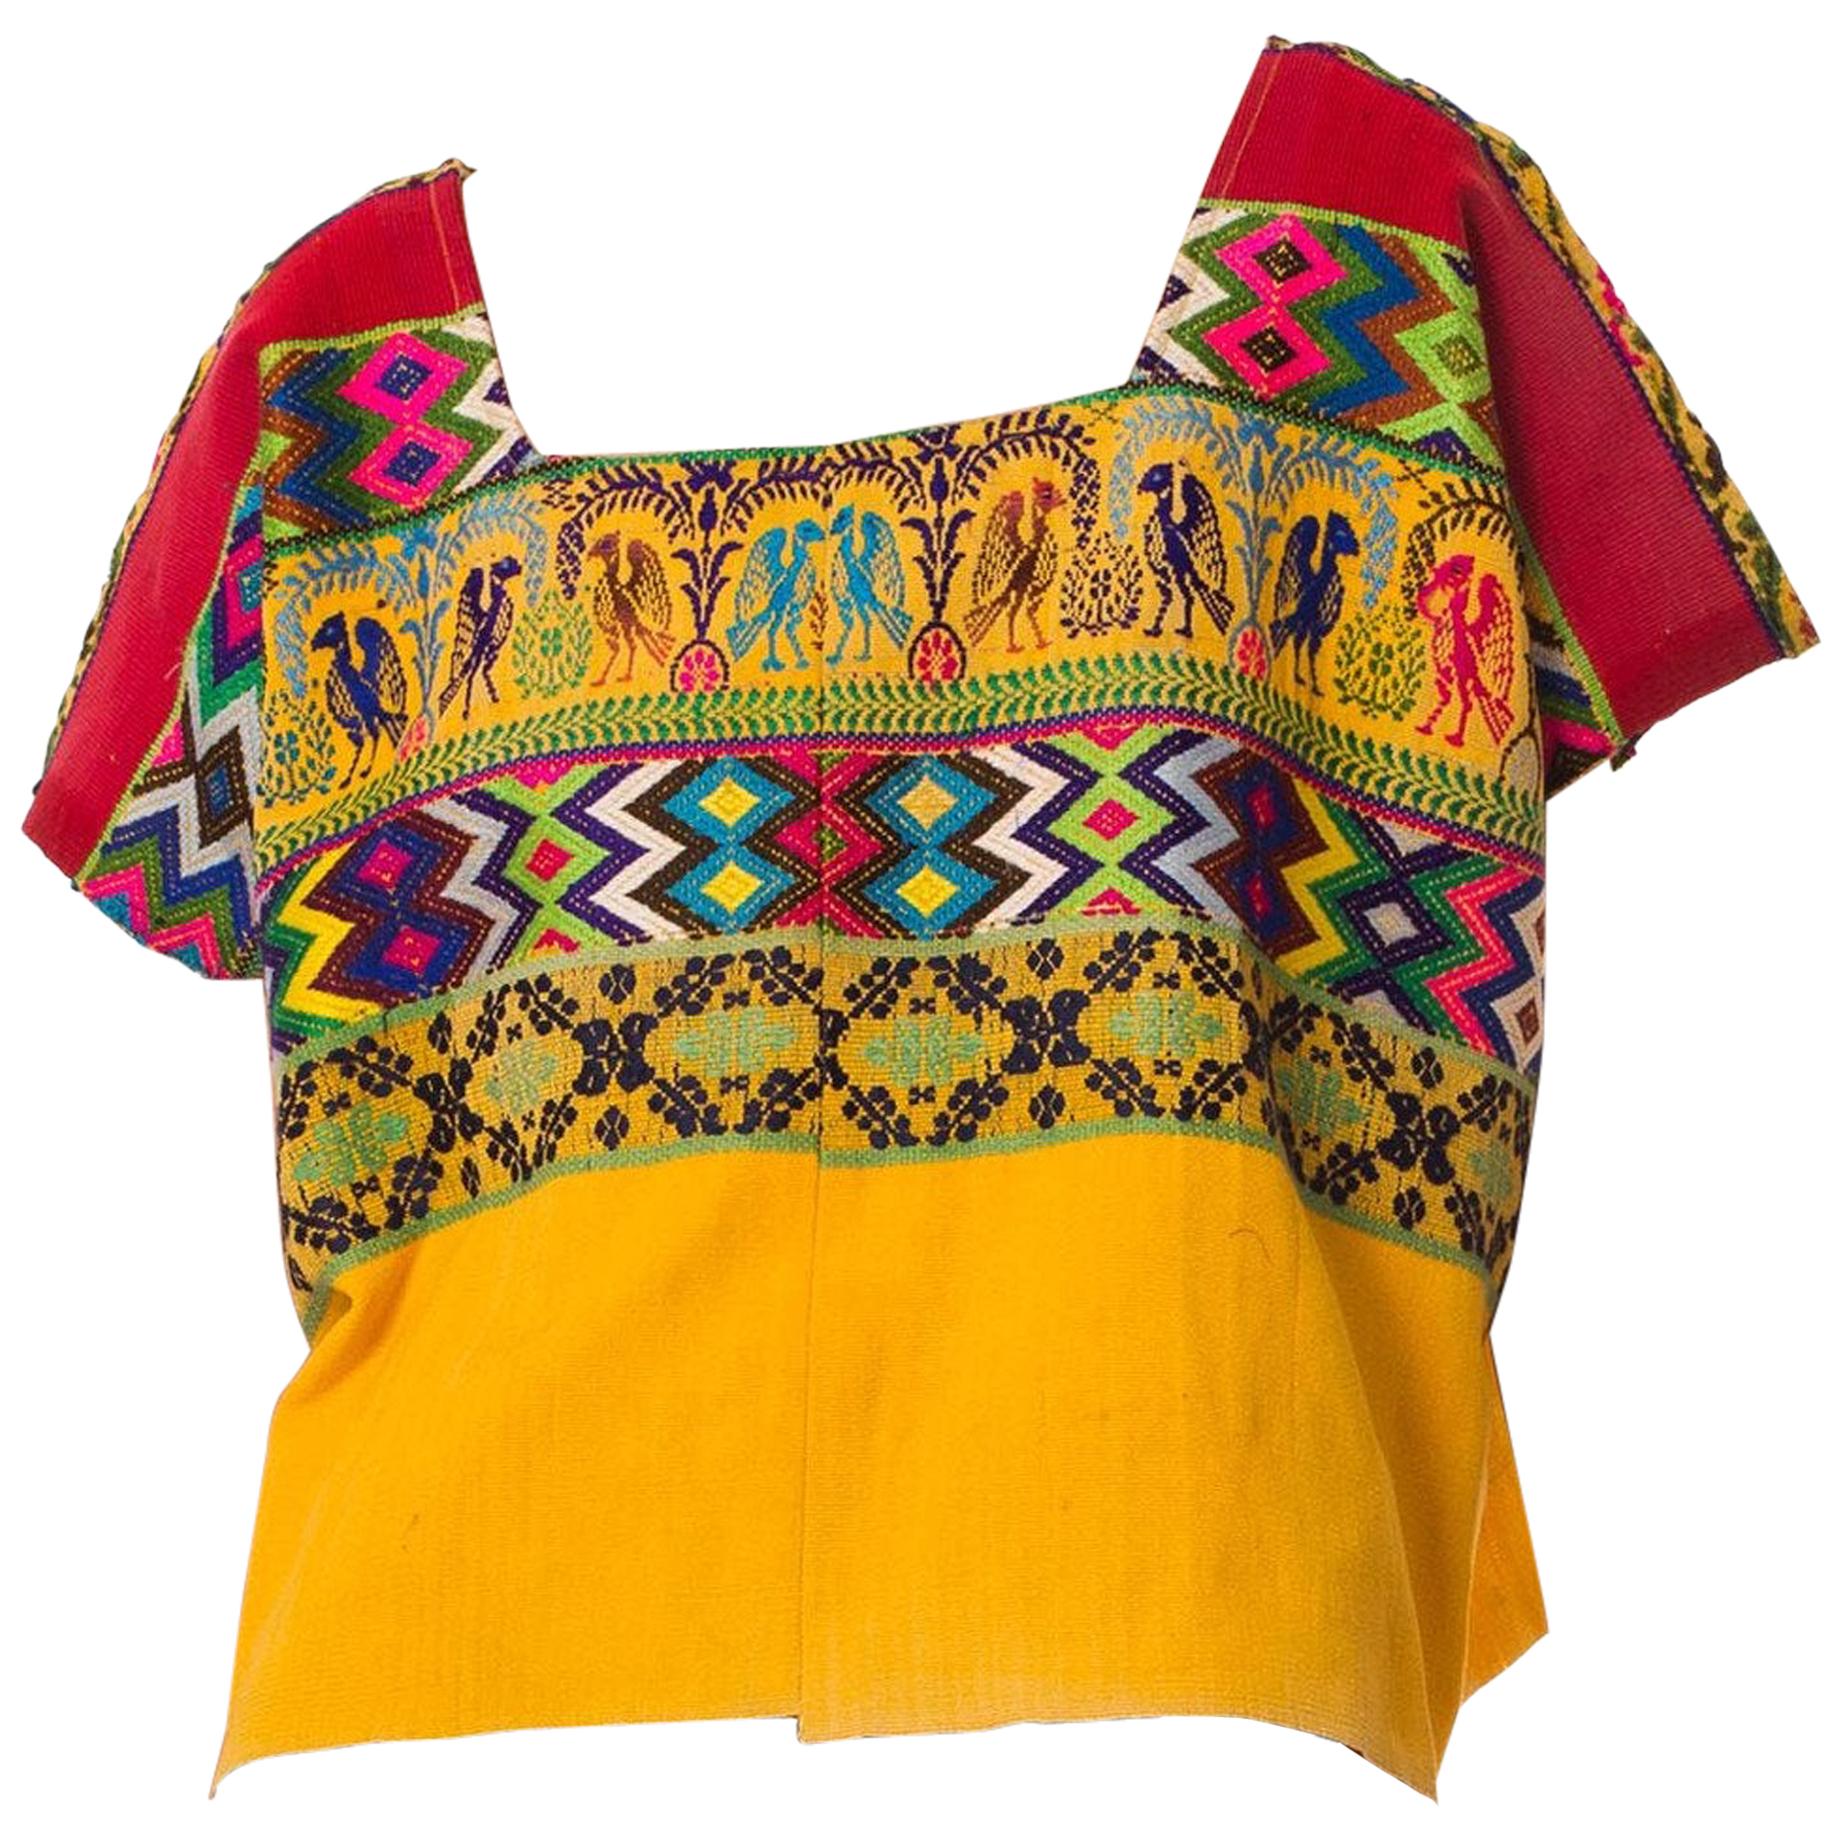 1970S Red & Yellow Cotton Top With Geometric Ethnic Hand Embroidery For Sale